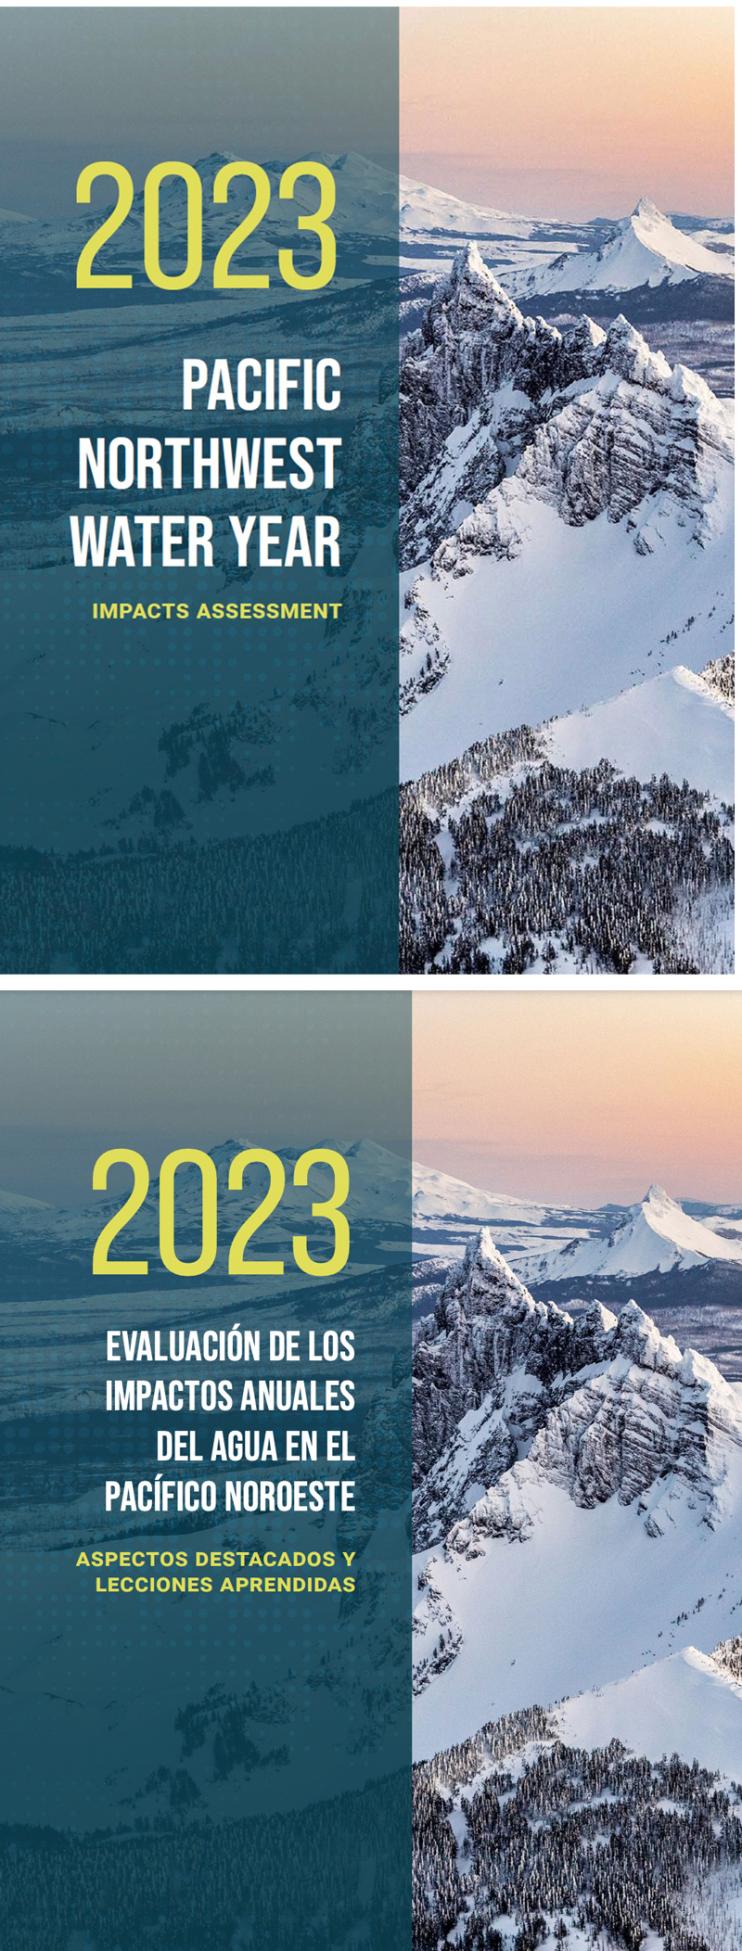 The 2023 Pacific Northwest Water Year Impacts Assessment.